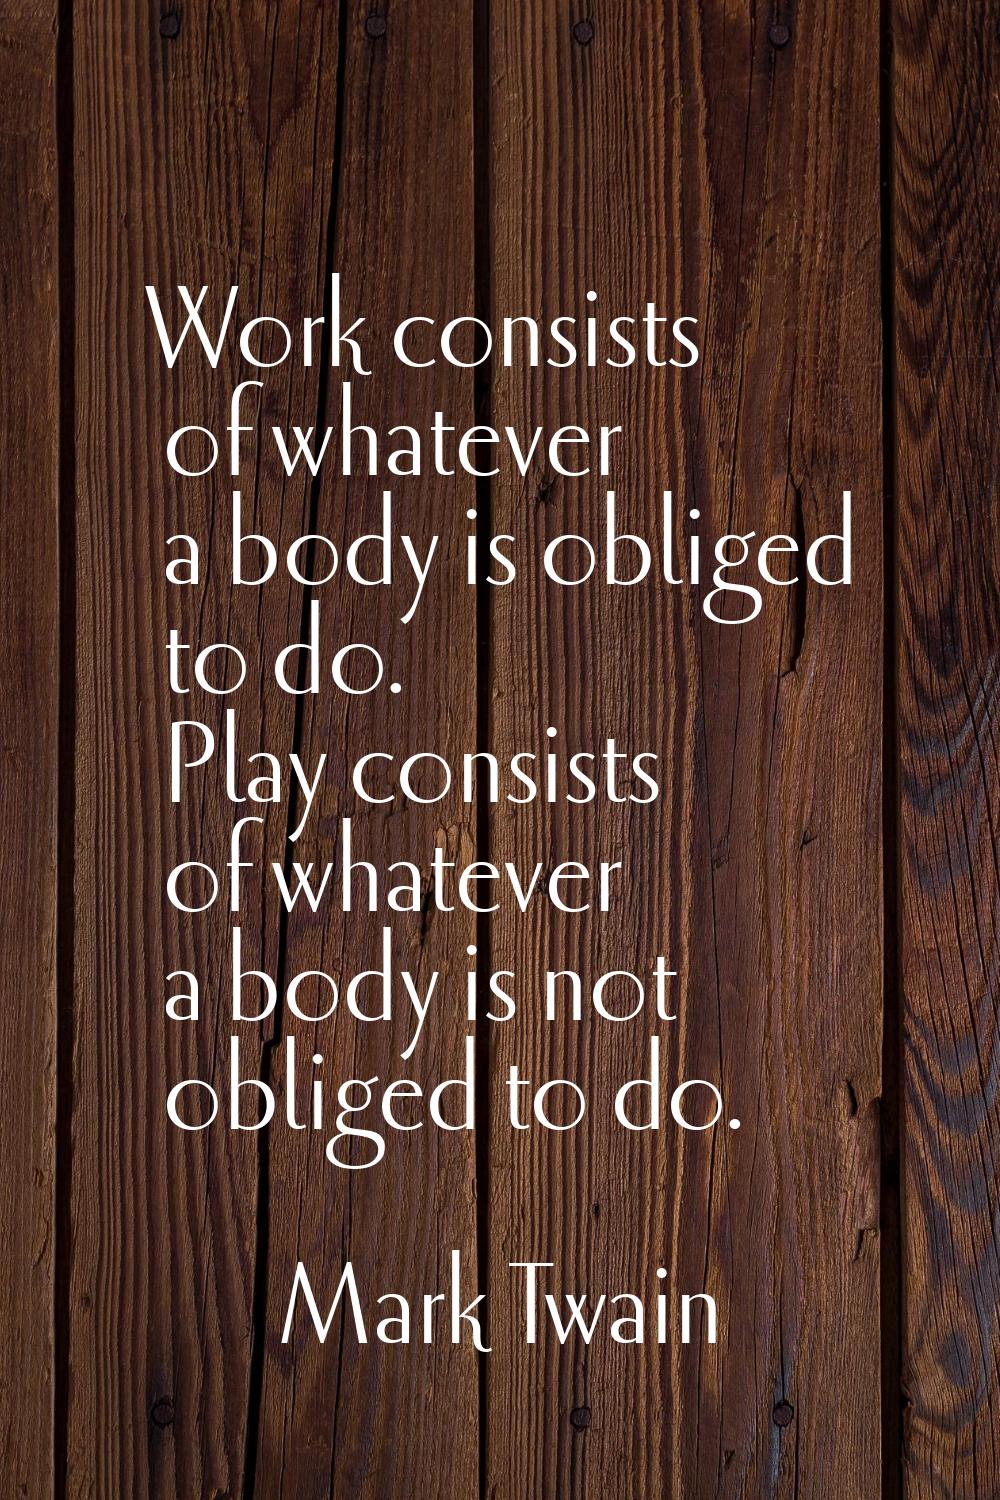 Work consists of whatever a body is obliged to do. Play consists of whatever a body is not obliged 